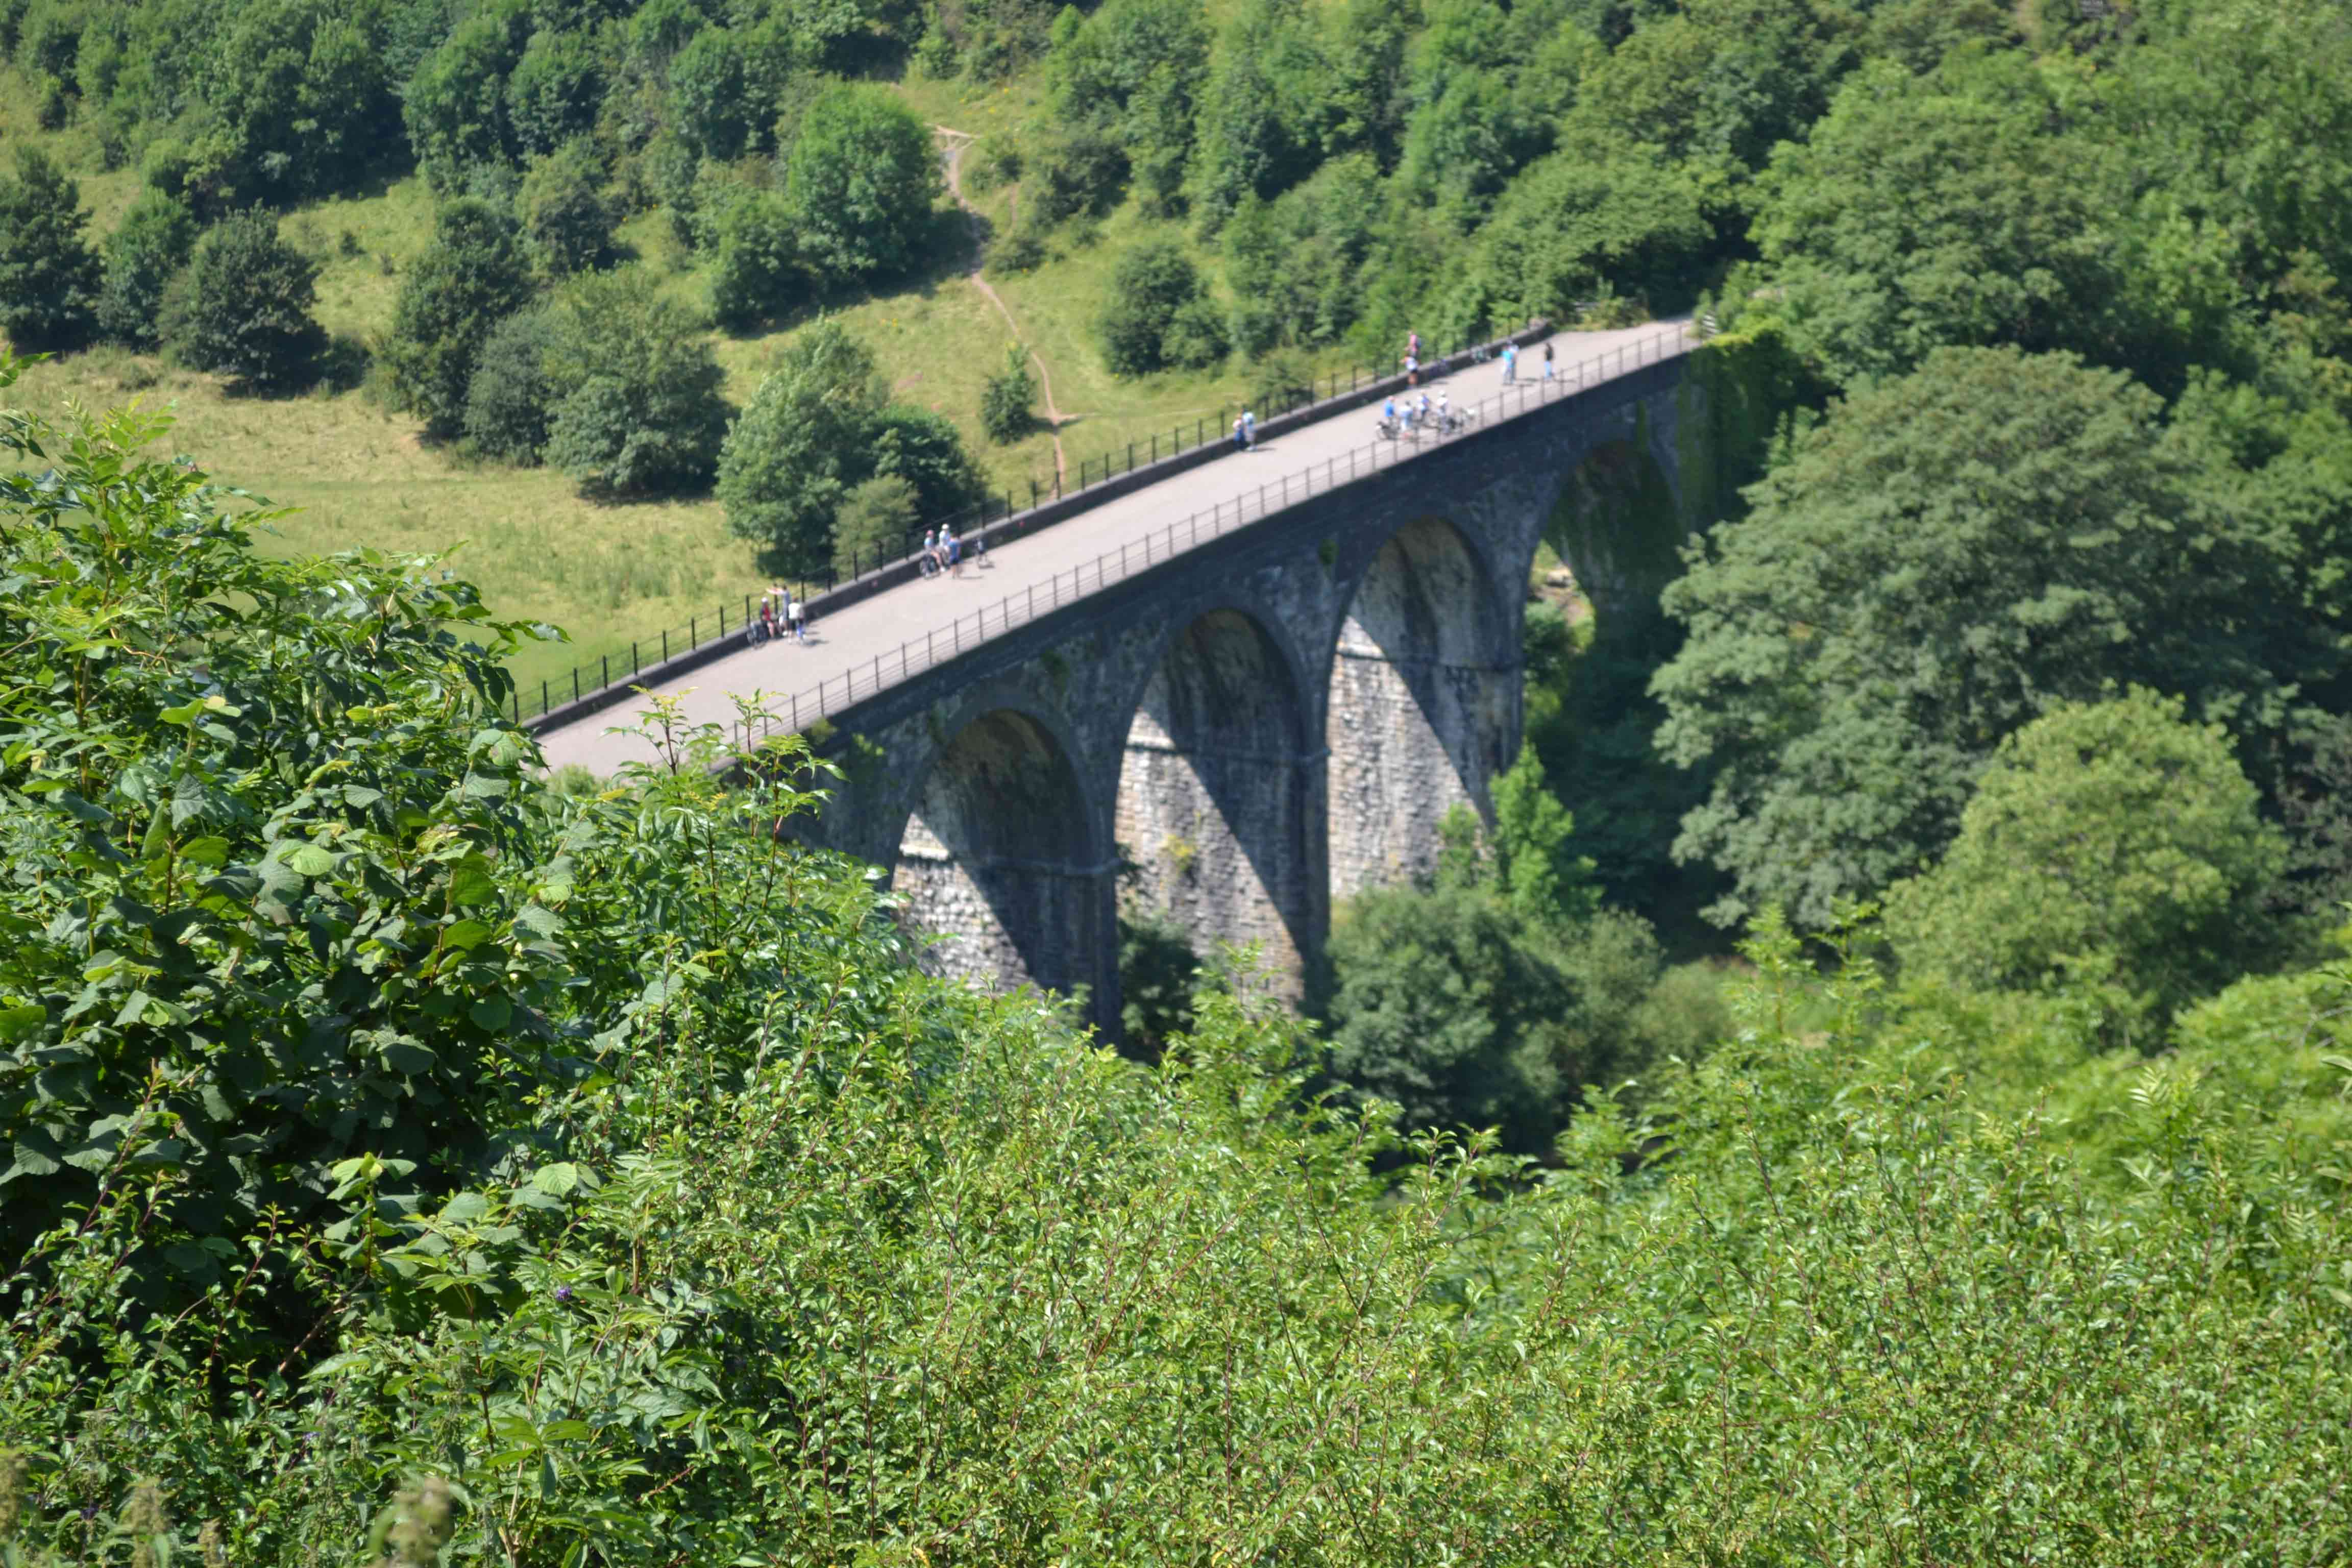 A Classic View of Headstone Viaduct